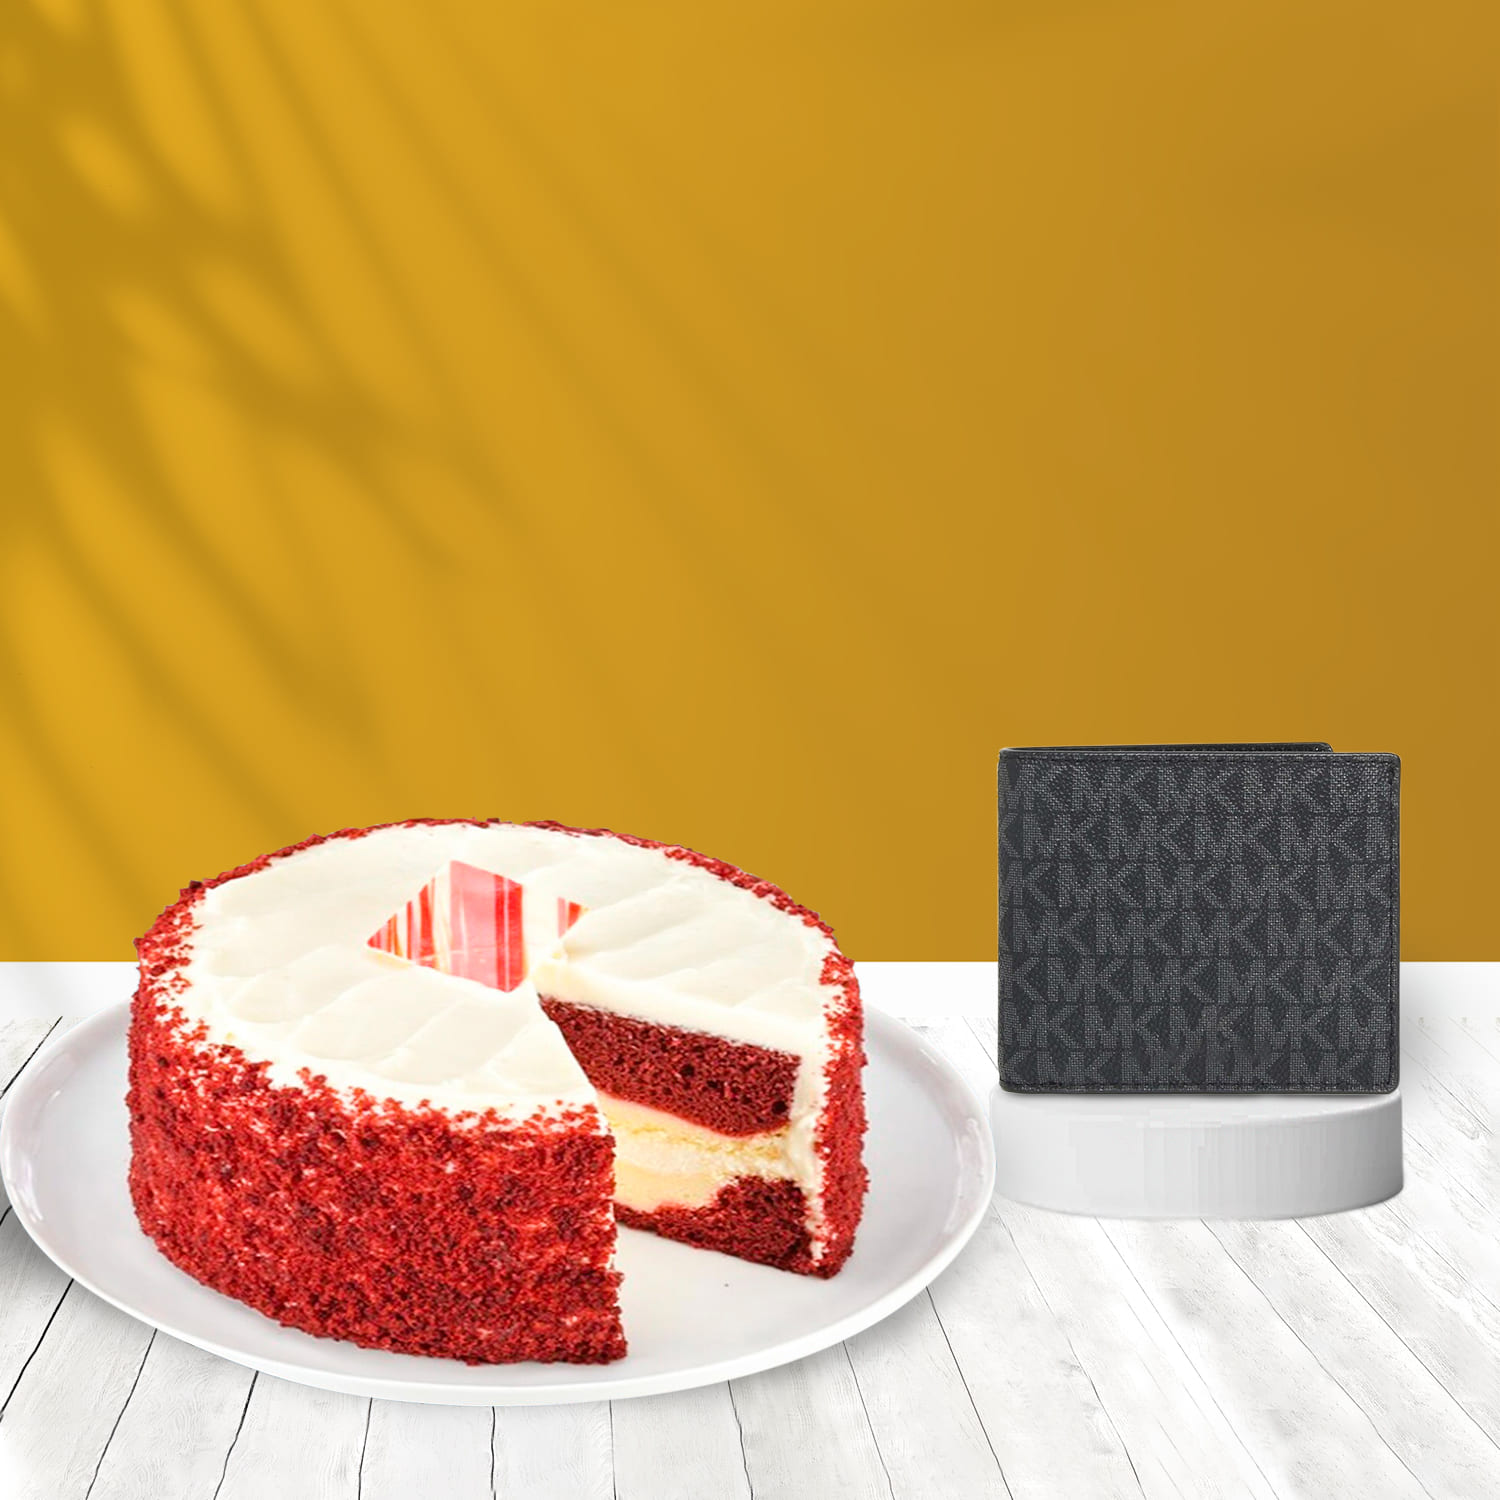 Cake Wallet Review - Your Go-To Mobile Wallet For Bitcoin And More